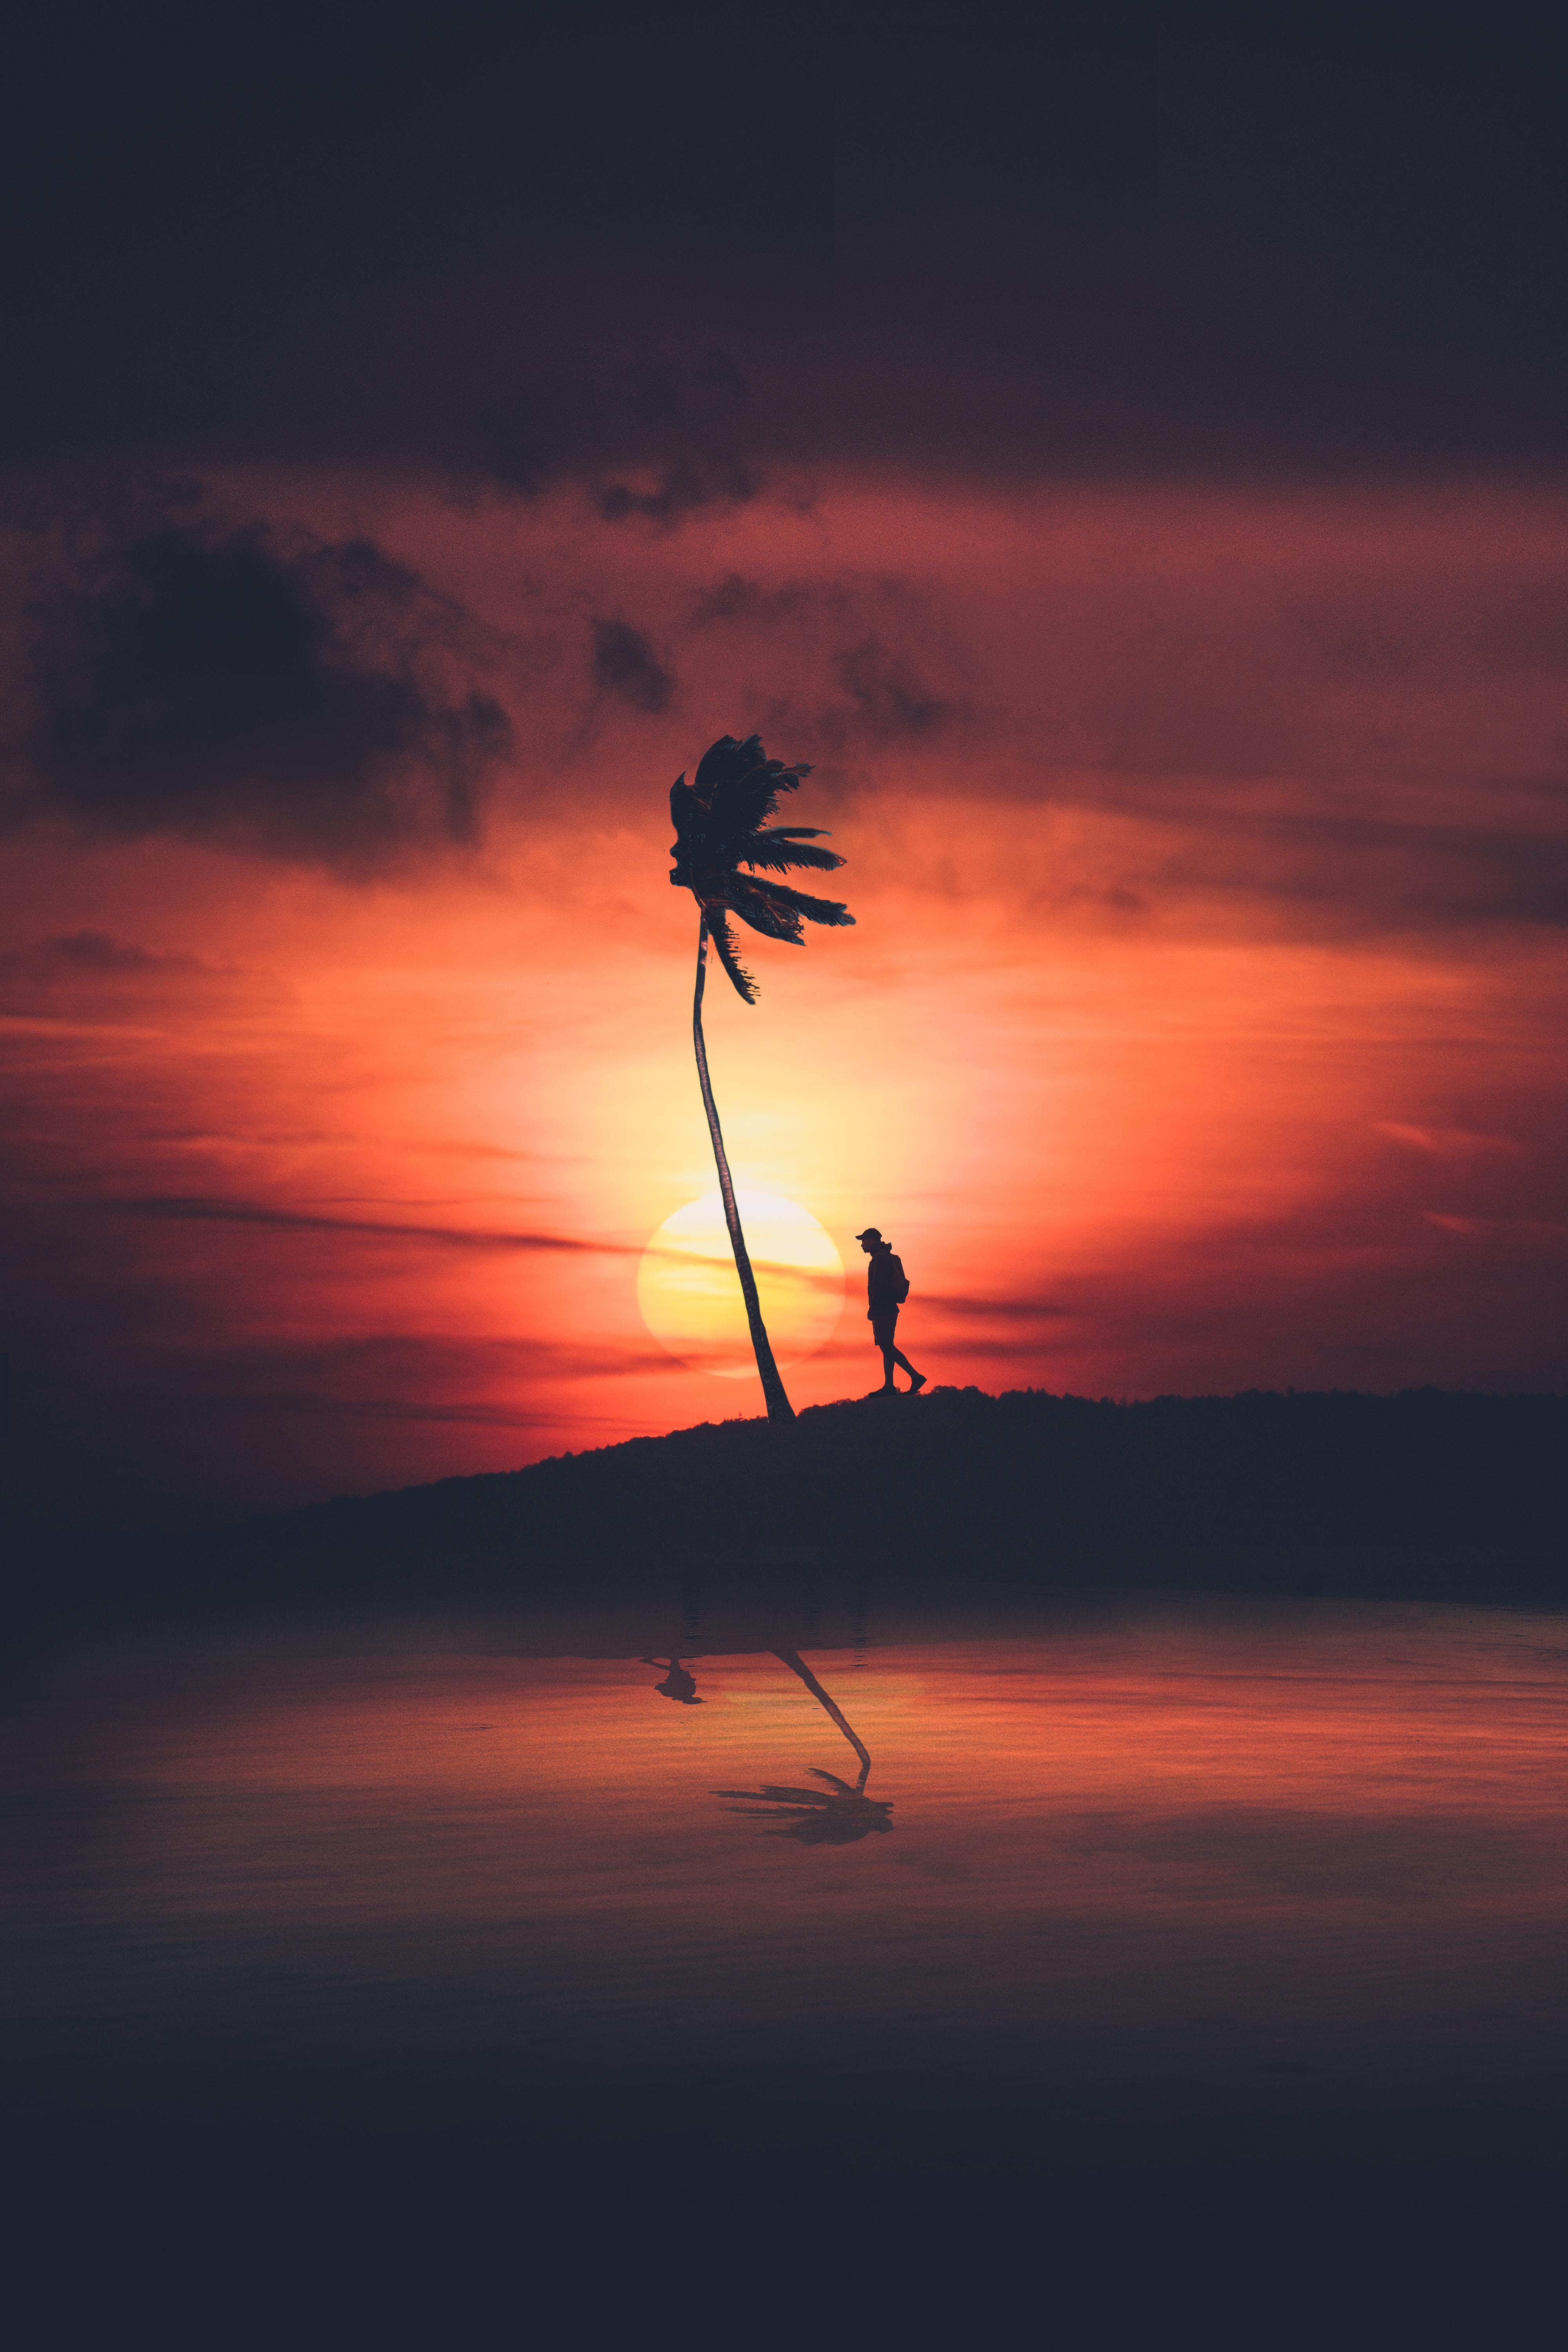 Seclusion privacy, loneliness, sunset, palm Lock Screen